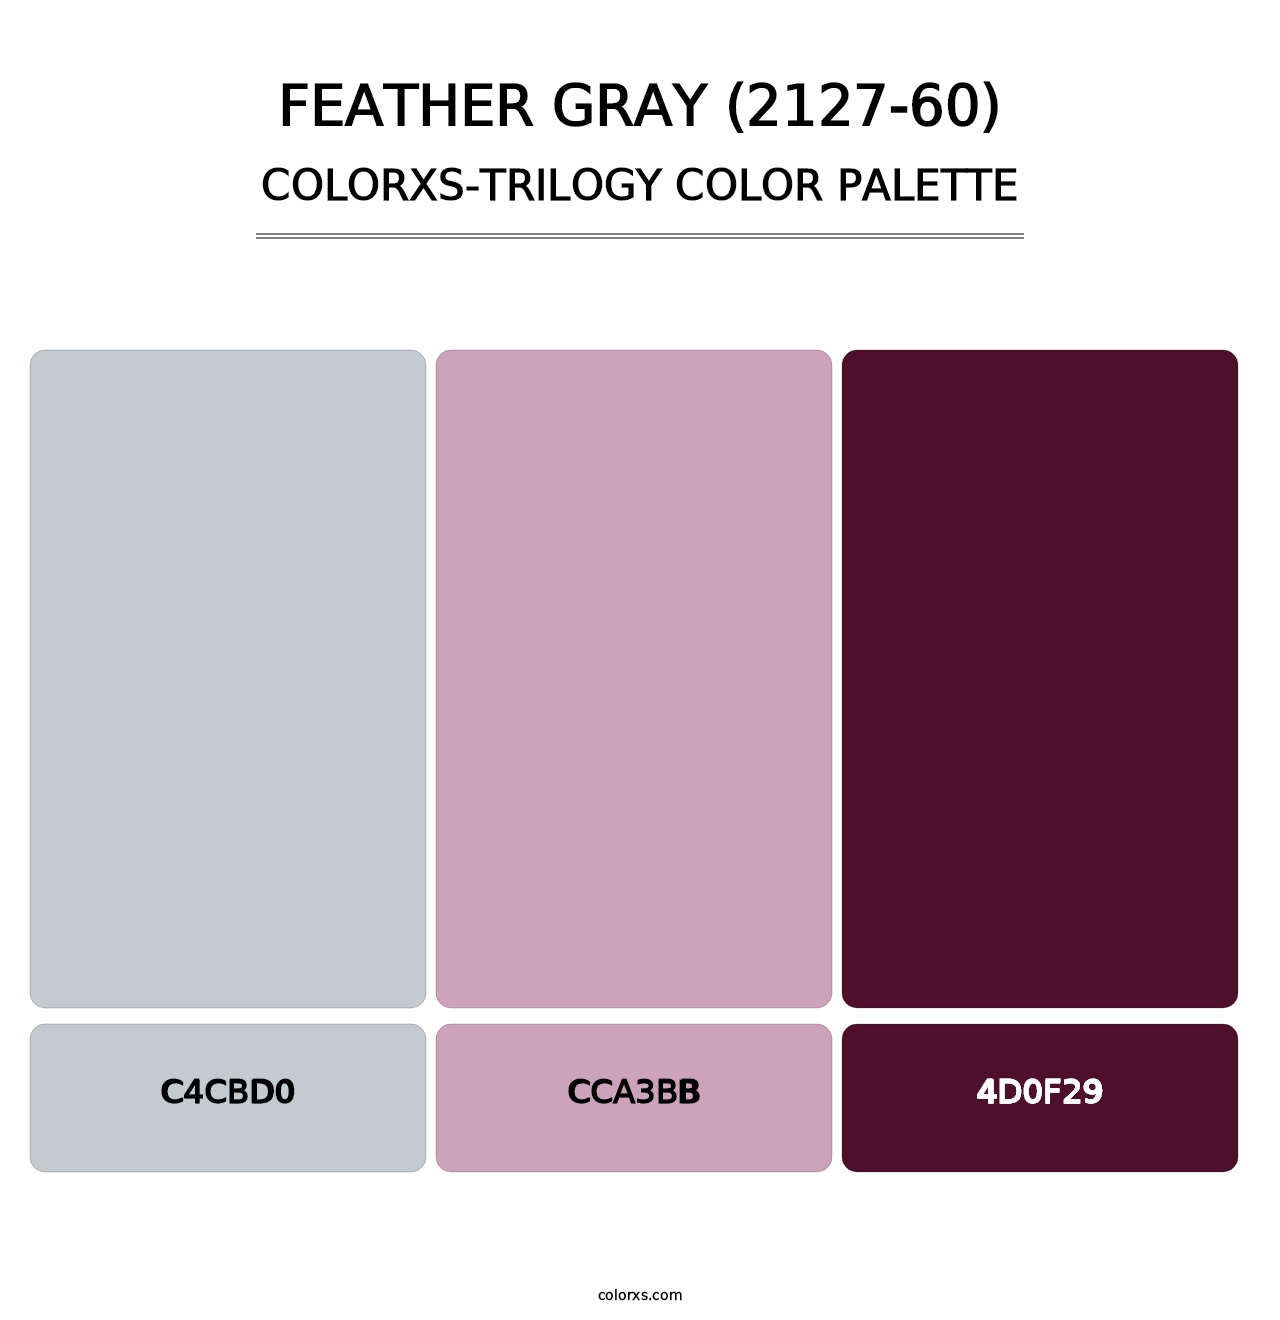 Feather Gray (2127-60) - Colorxs Trilogy Palette